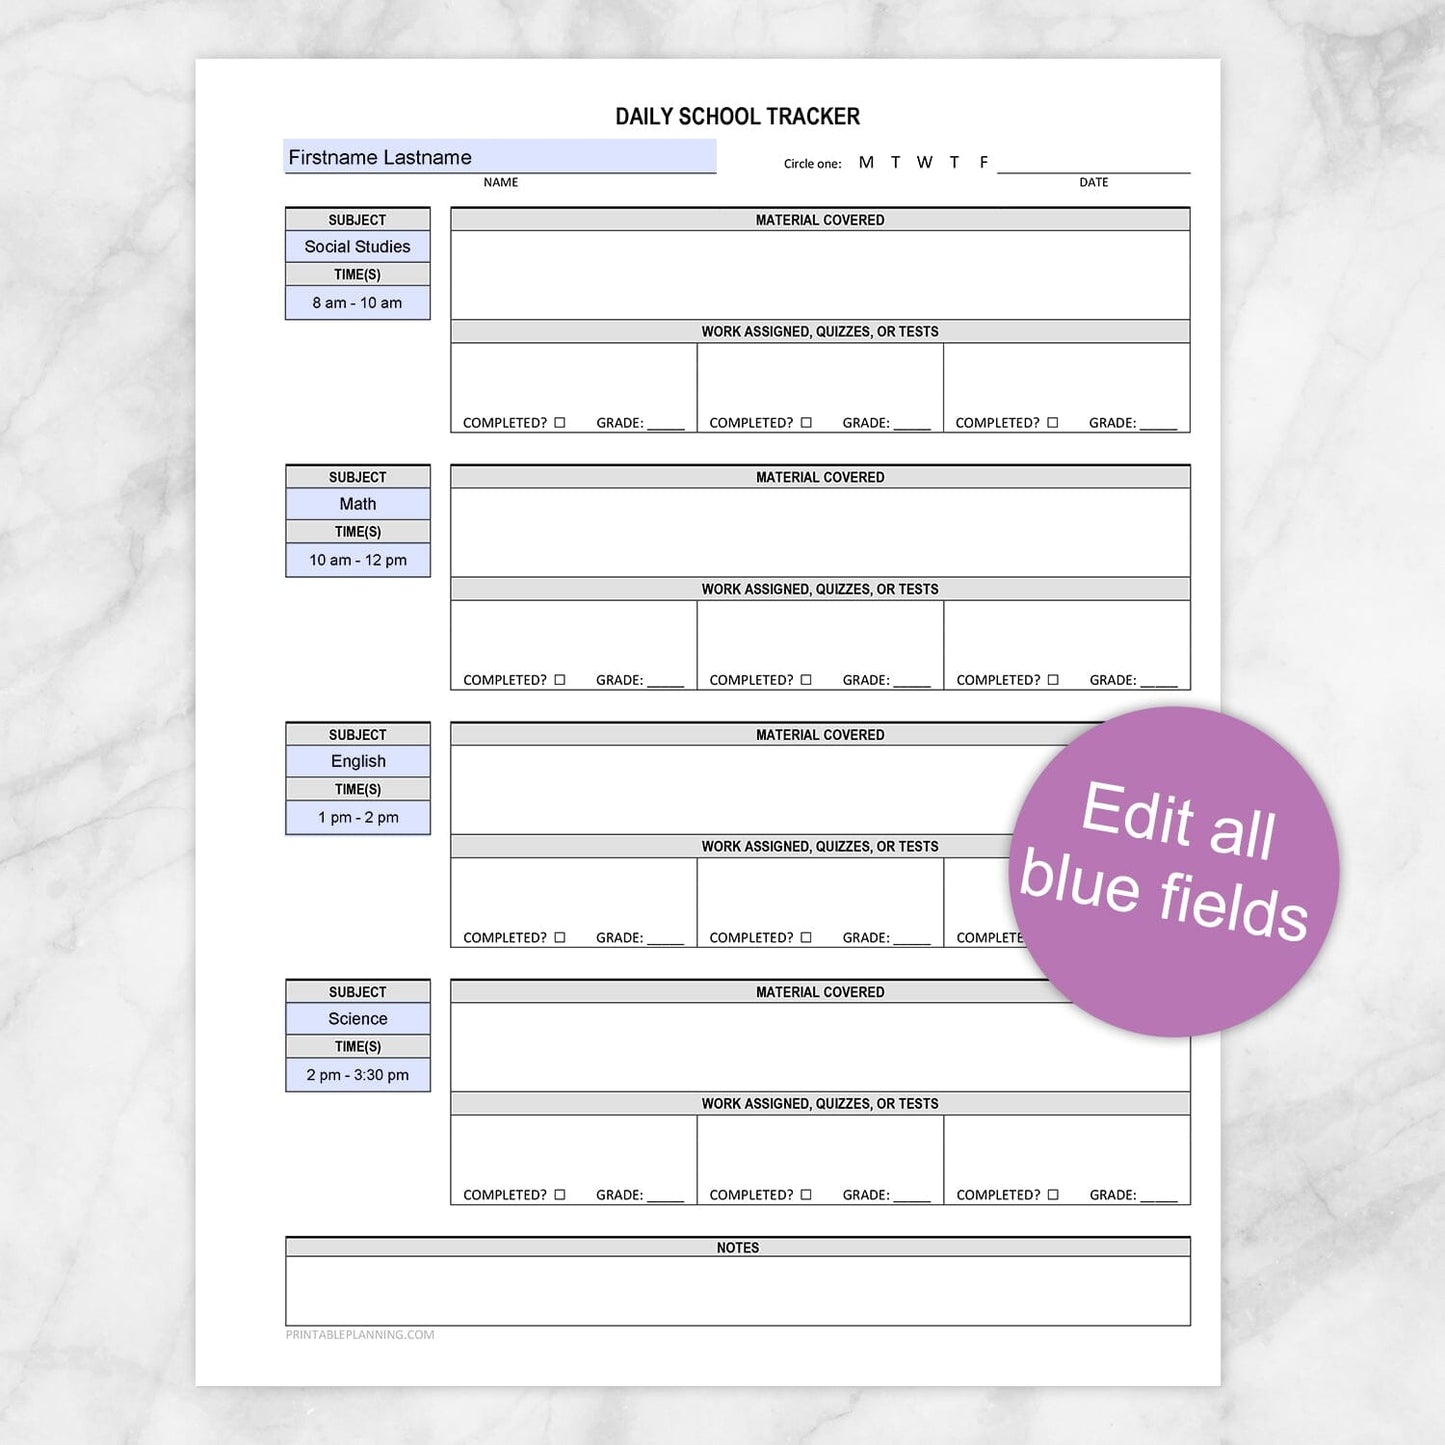 Printable Homeschooling Page, Daily School Tracker at Printable Planning. Edit all blue fields to fit your school schedule.